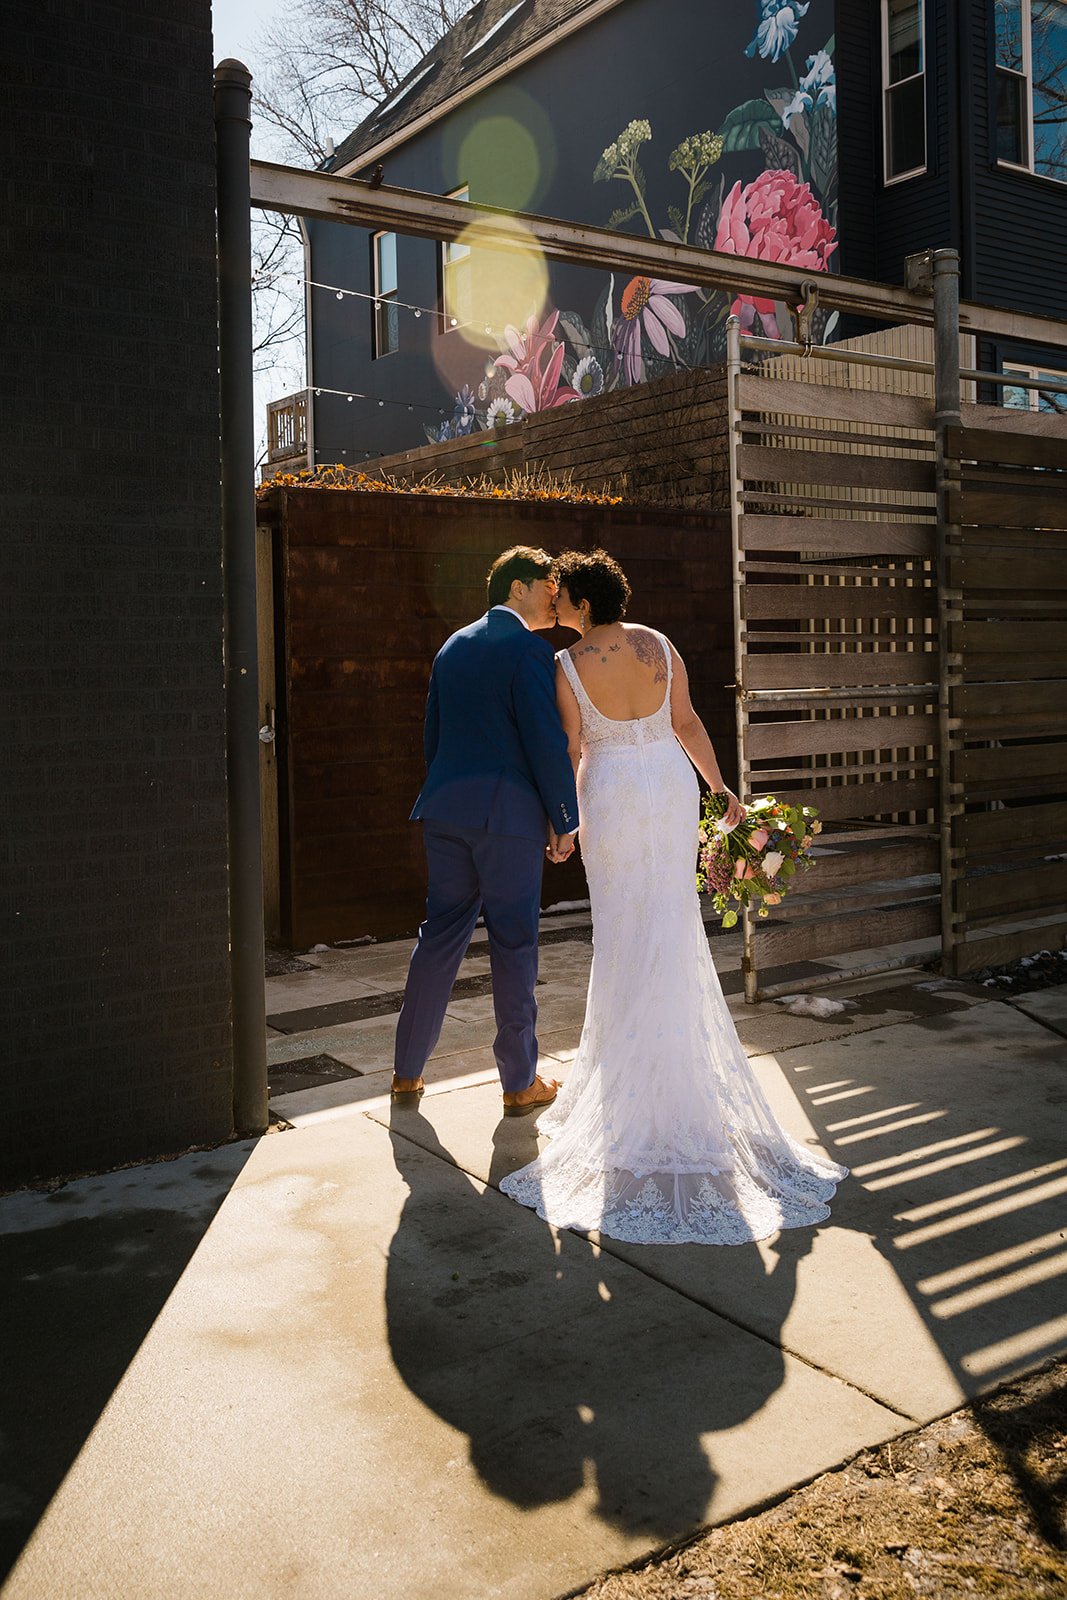  Portrait of nontraditional wedding from behind kissing in the patio doorway at The Joinery Chicago in Logan Square. Their shadow is behind them on the sidewalk and a colorful sun flare emerges from the top. Bright, colorful, unique wedding photograp